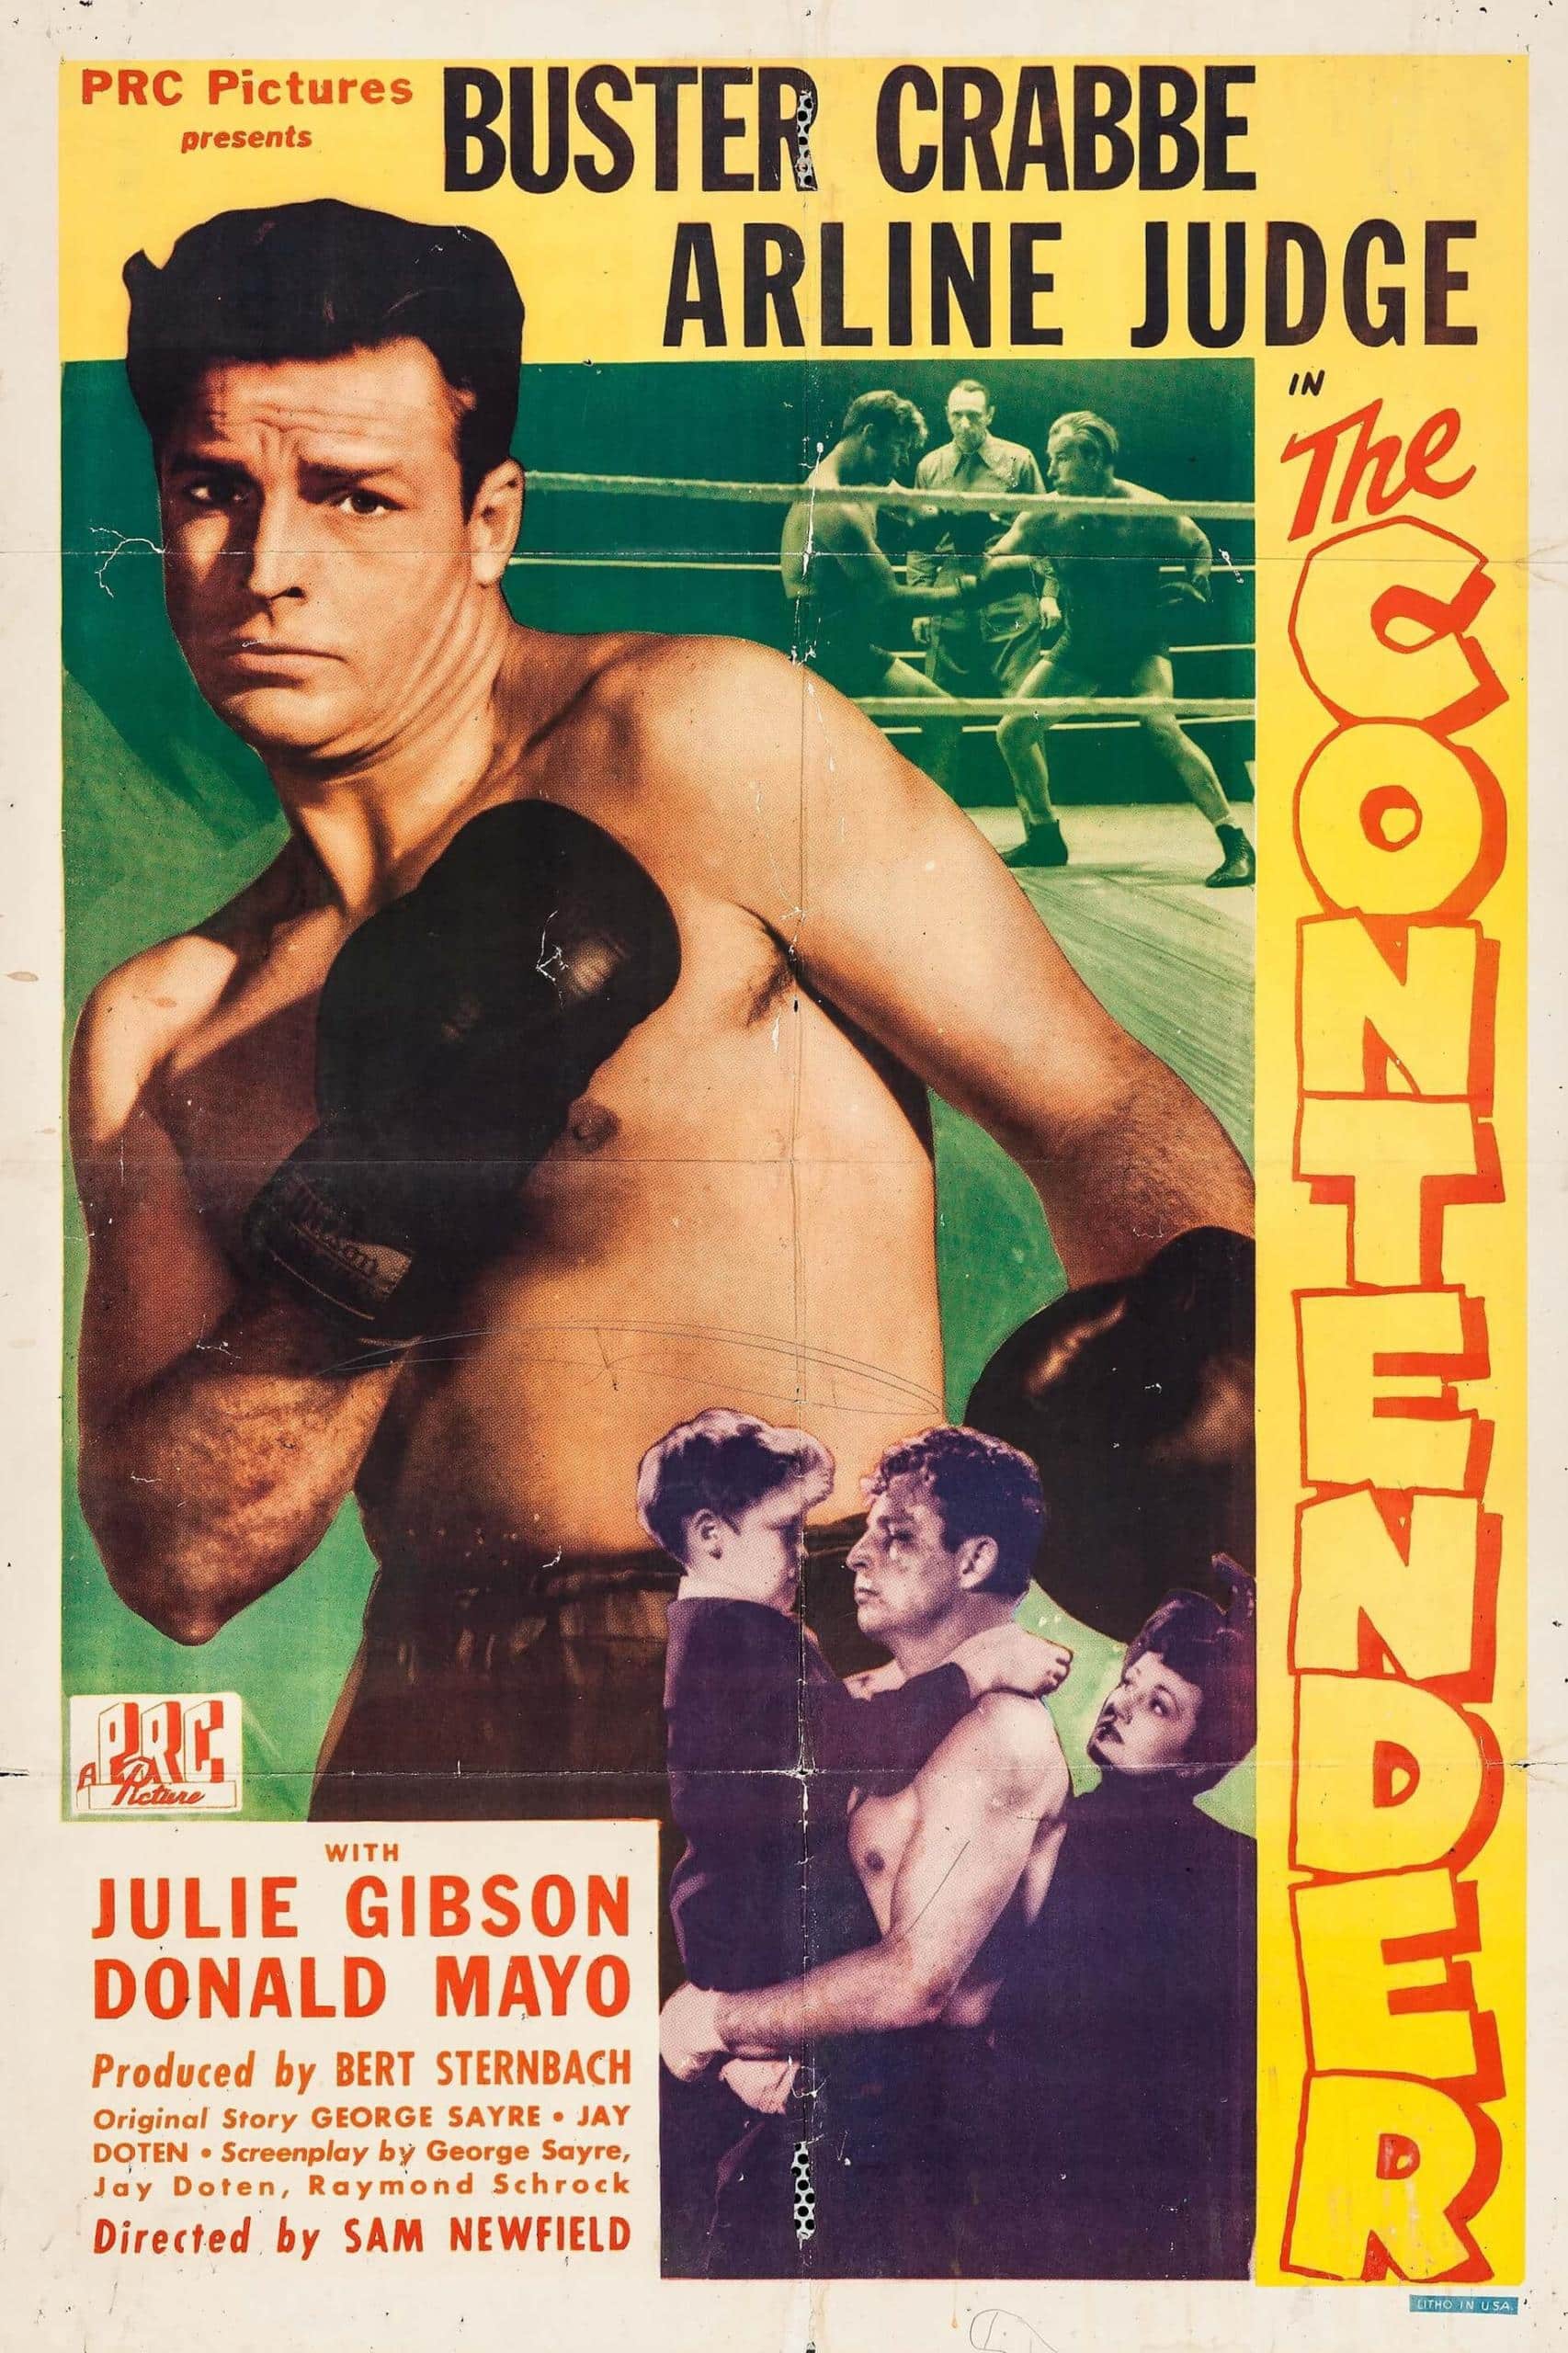 Poster for the movie "The Contender"